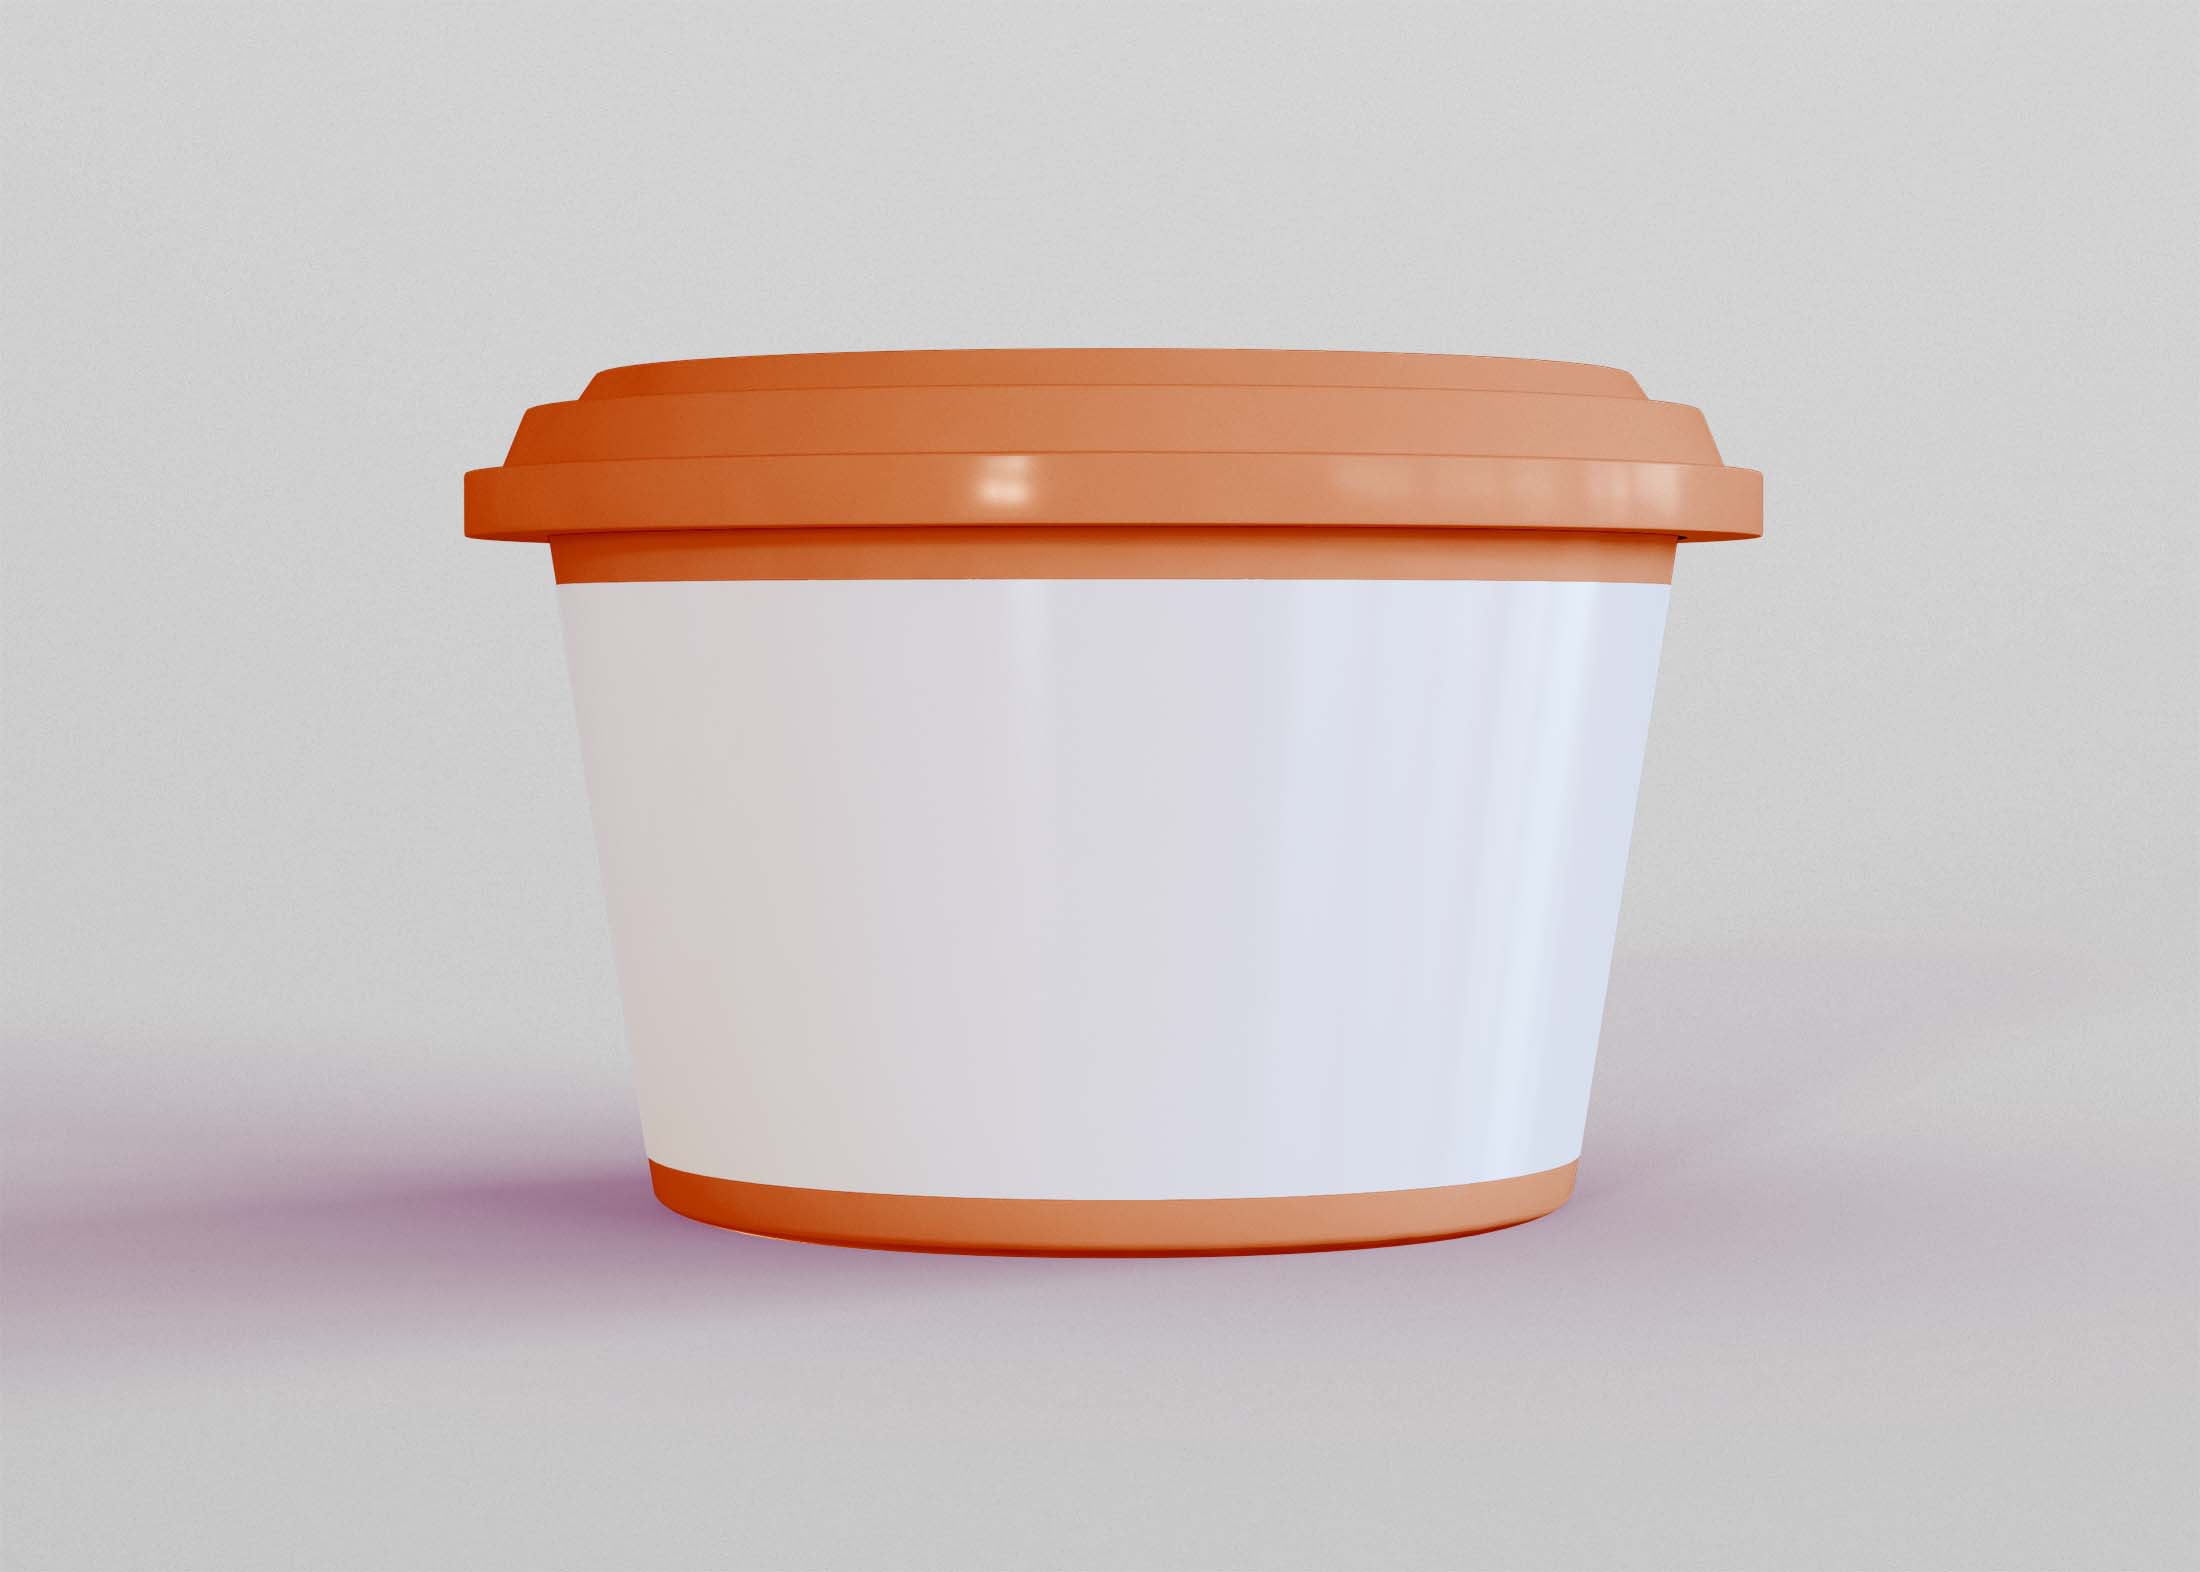 I came across this so cute ice cream tub the other day and I just fell in love. This is a free psd ice cream tub for you to play with to your heart until you either get inspired or bored by it, hopefully the second part will never happen. Take it and use it as you. Have you been looking for a great ice cream tub mockup to advertise your upcoming summer collection? If so, look no further. This freebie contains a editable PSD template perfect to promote your name brand and showcase your new line of frozen treats. This mockup features an open plastic ice cream tub holding delicious creamy ice cream. The packaging for the ice cream is a traditional cardboard box with an image of rainbow swirls on the front. Pick out your favorite flavors and place them in the tubs or cups. Feel free to tweak it to work with your branding and project needs. The PSD file is for Photoshop CC and older. The PSD file is layered, organized in folders and easy to use. Treat yourself to an ice cream when the sun is shining. This free plastic ice cream tub mockup lets you create professional promotional materials at an affordable price. This is a free mockup of a plastic ice cream tub which can be used in your packaging designs to show the size. Excellent for ice cream parlors, fast food restaurants, buffets, bakeries and cafes who want to promote their ice cream tubs service.